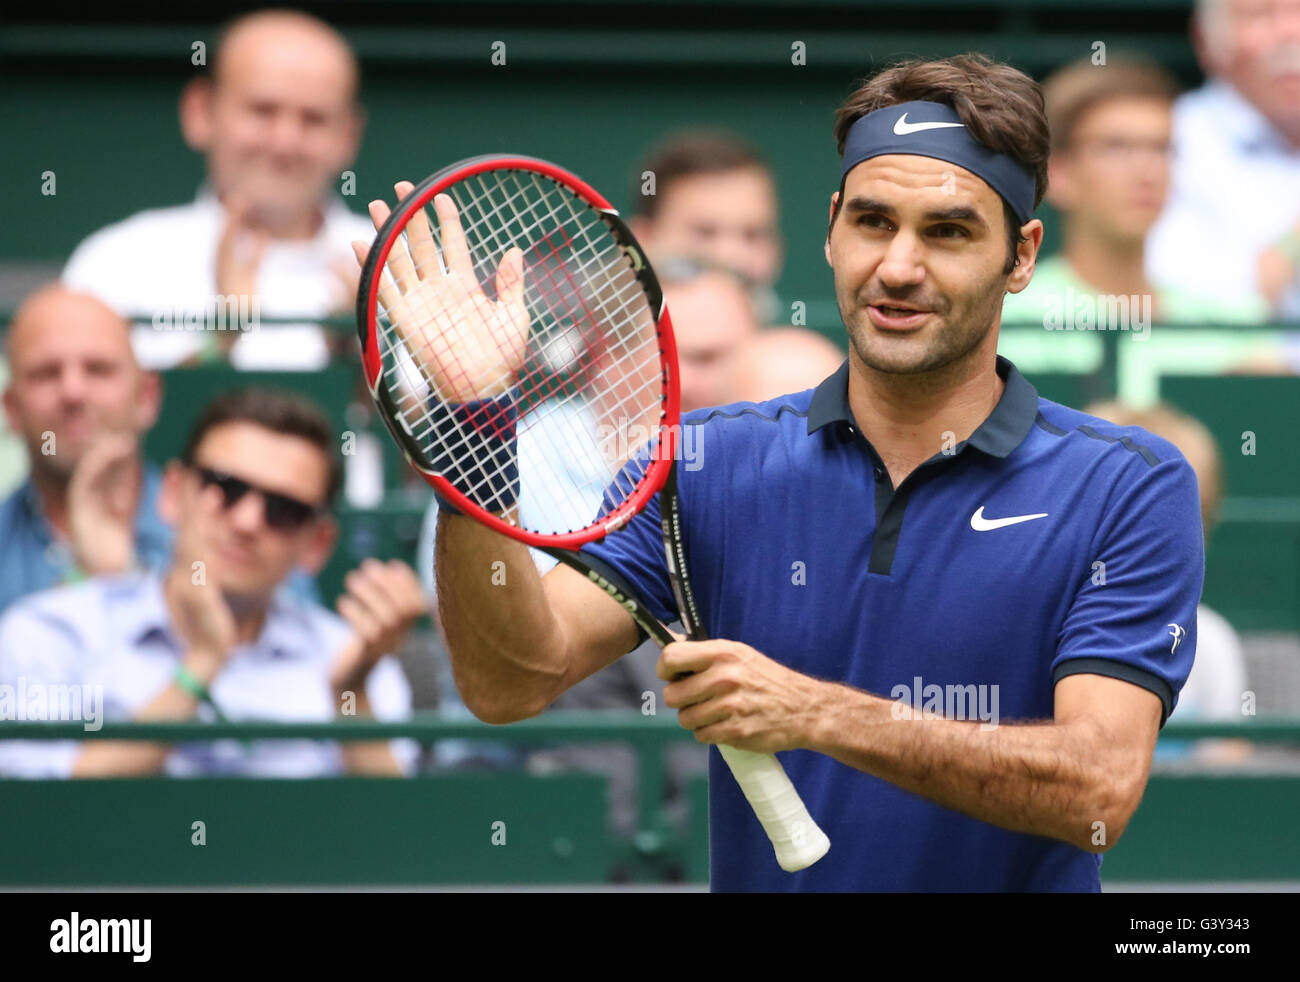 Halle, Germany. 16th June, 2016. Roger Federer of Switzerland waves after  his victory in the match against M. Jaziri of Tunisia during the ATP tennis  tournament in Halle, Germany, 16 June 2016.